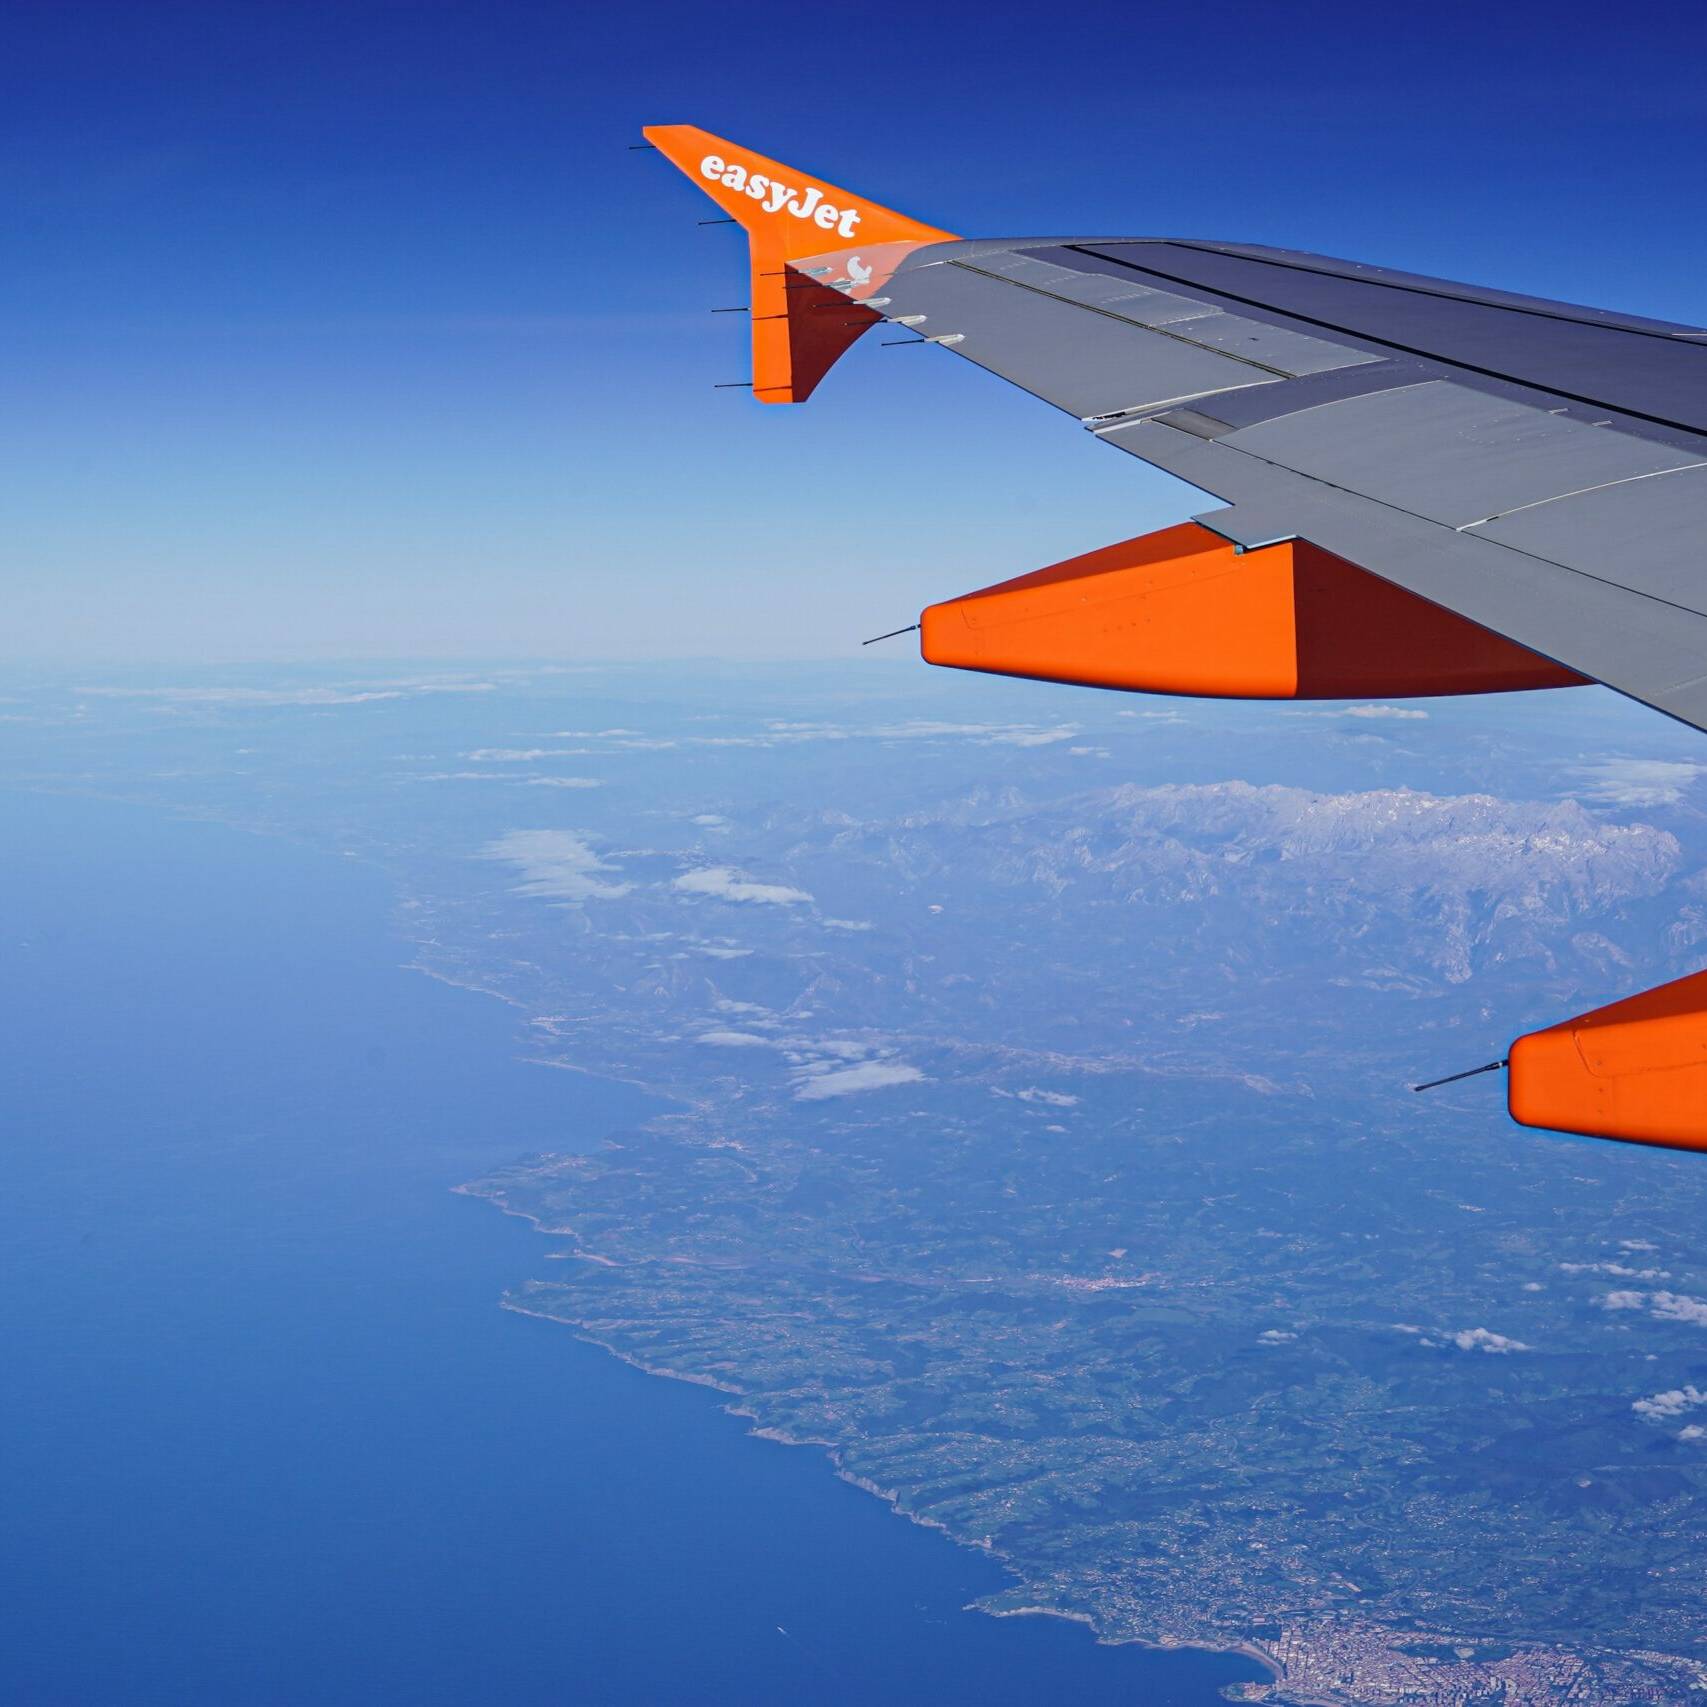 low cost airlines - easy jet in the sky